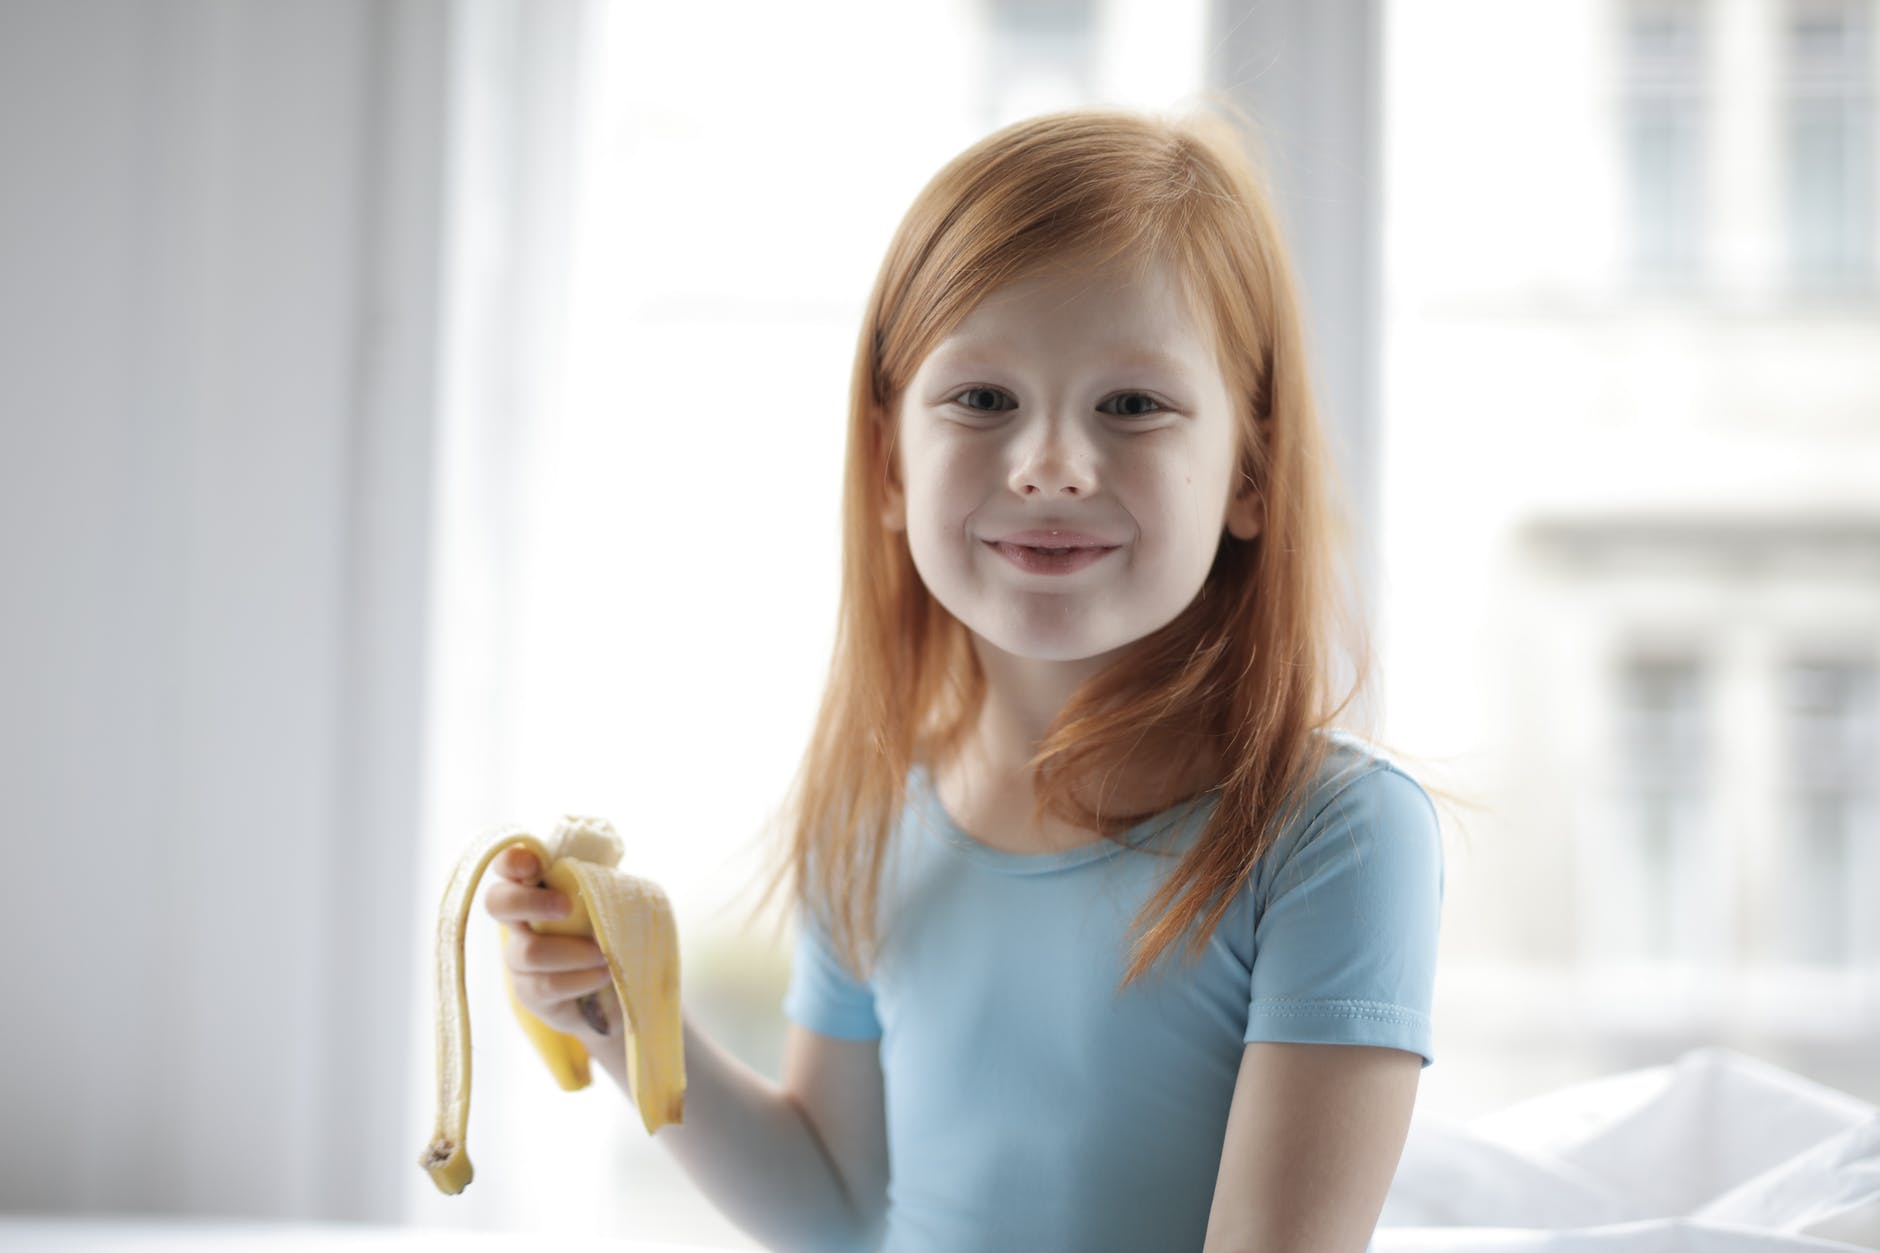 Bananas for boosting energy and bring happiness